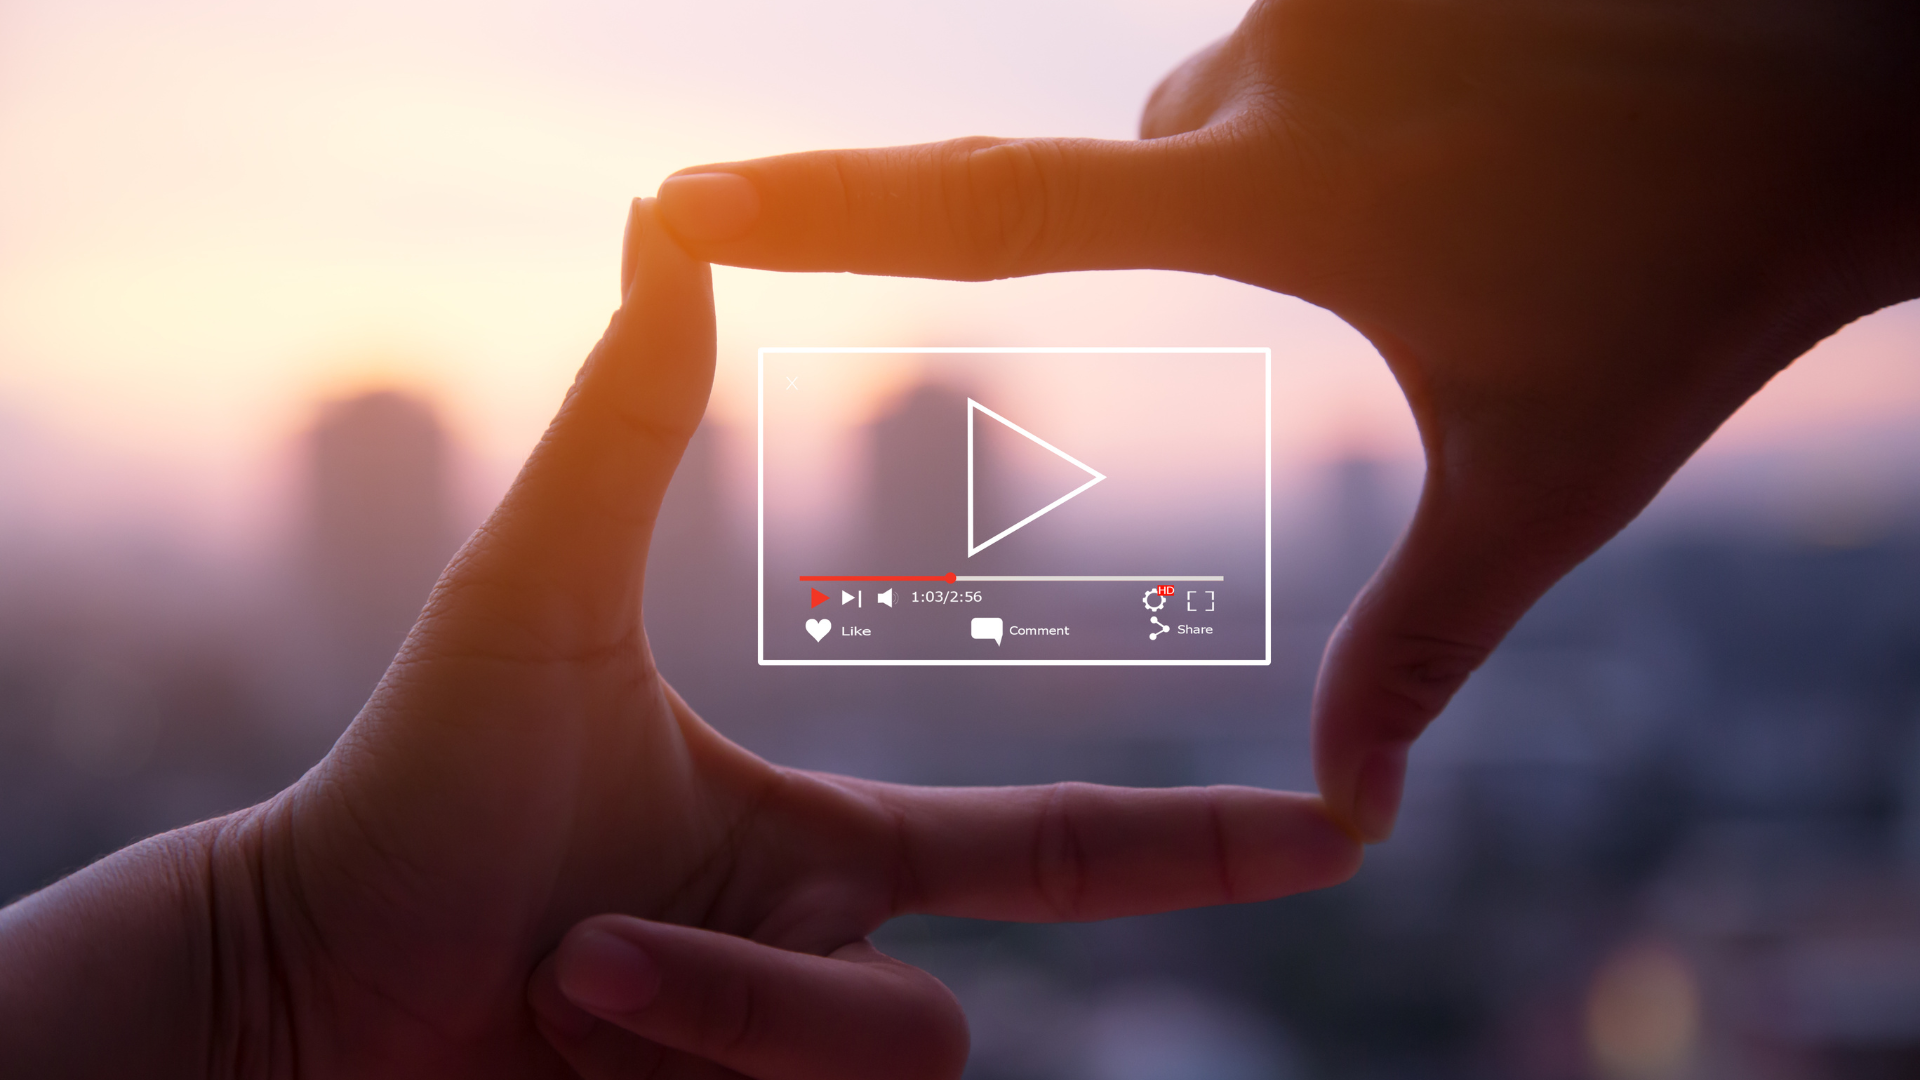 Video content is a powerful marketing tool that can help you reach a wider audience, build trust, and drive conversions.ideo content is a powerful marketing tool that can help you reach a wider audience, build trust, and drive conversions.